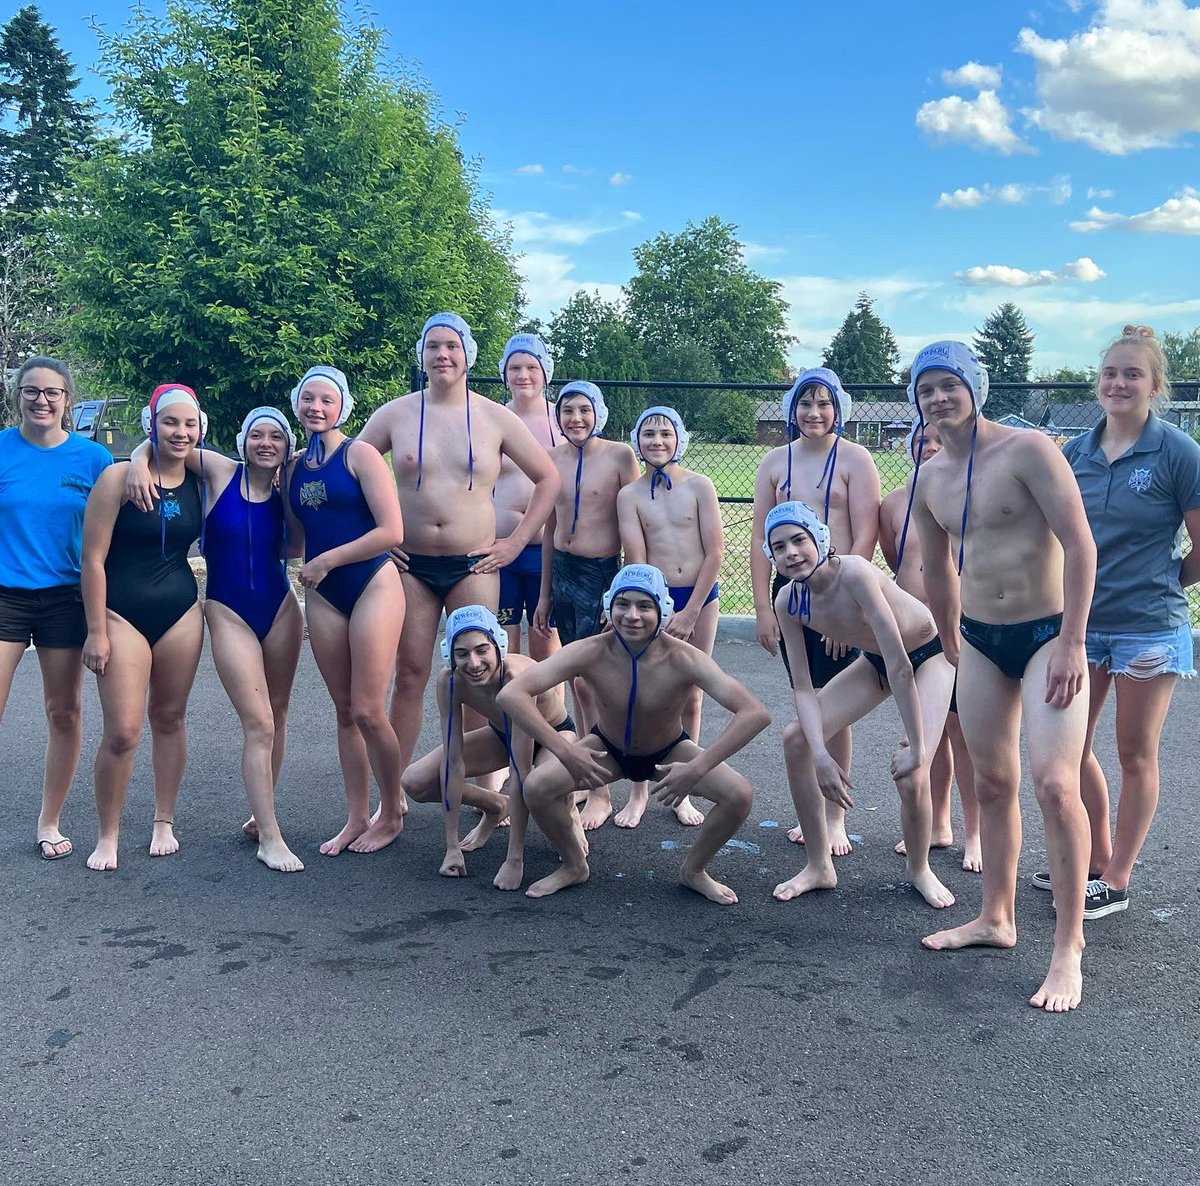 Our 14u team delivers more awesomeness at the Summer Splash tournament, with the A & B teams facing off against each other in the championship game! 💪👏 #newbergwaterpolo #clubwaterpolo #oregonwaterpolo #14uwaterpolo #waterpolotournament #waterpolo